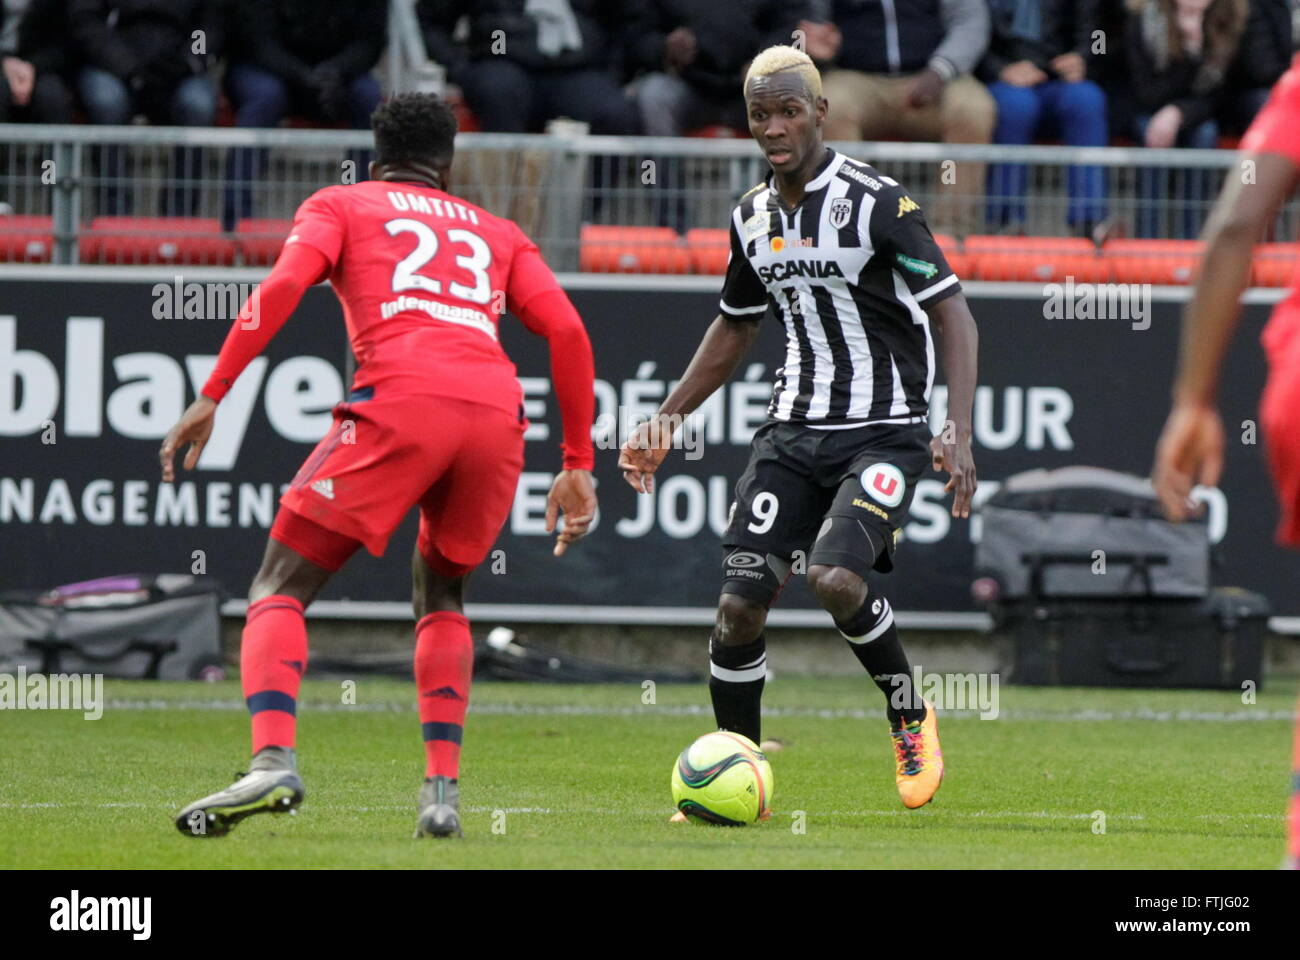 Angers, France, February 6, 2016: Ligue 1  action at du match between SCO Angers - Olympique Lyonnais Stock Photo